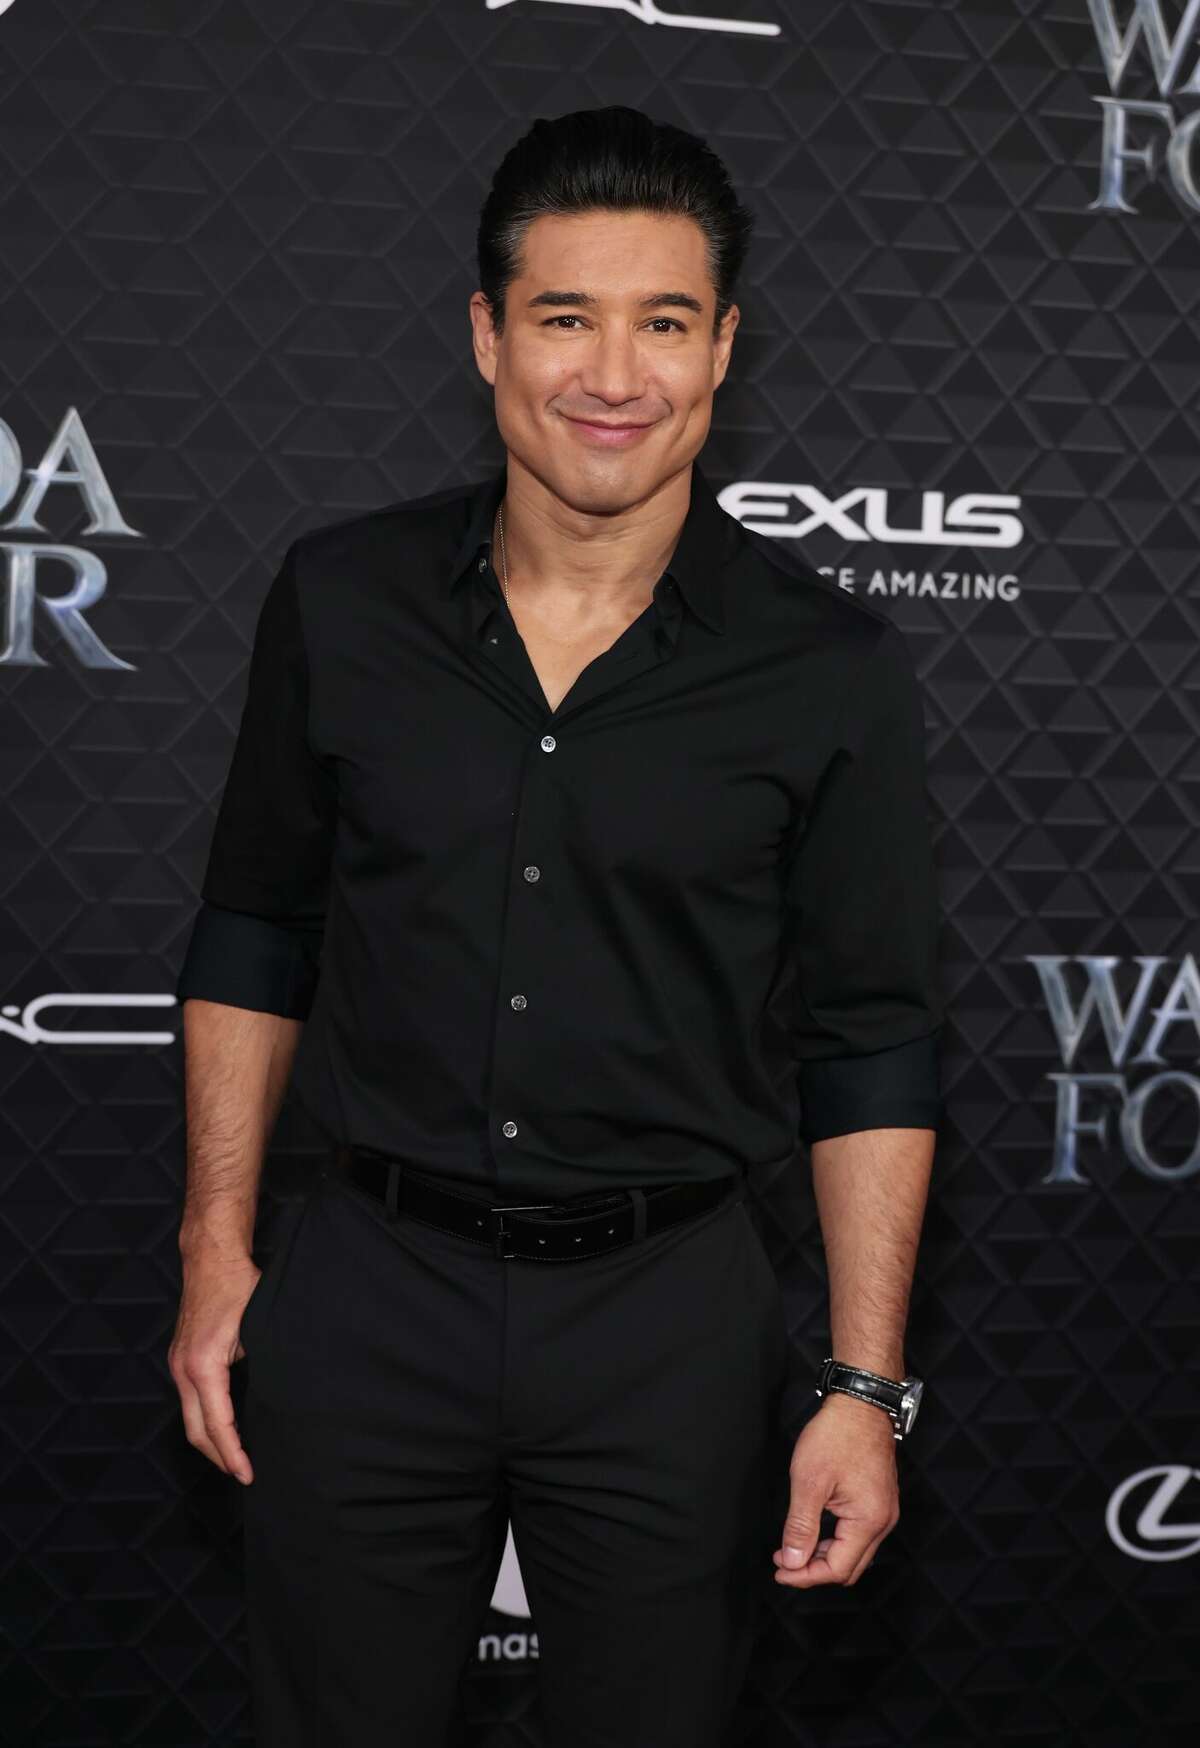 Mario Lopez attends Marvel Studios' "Black Panther: Wakanda Forever" premiere at Dolby Theatre on October 26, 2022 in Hollywood, California.